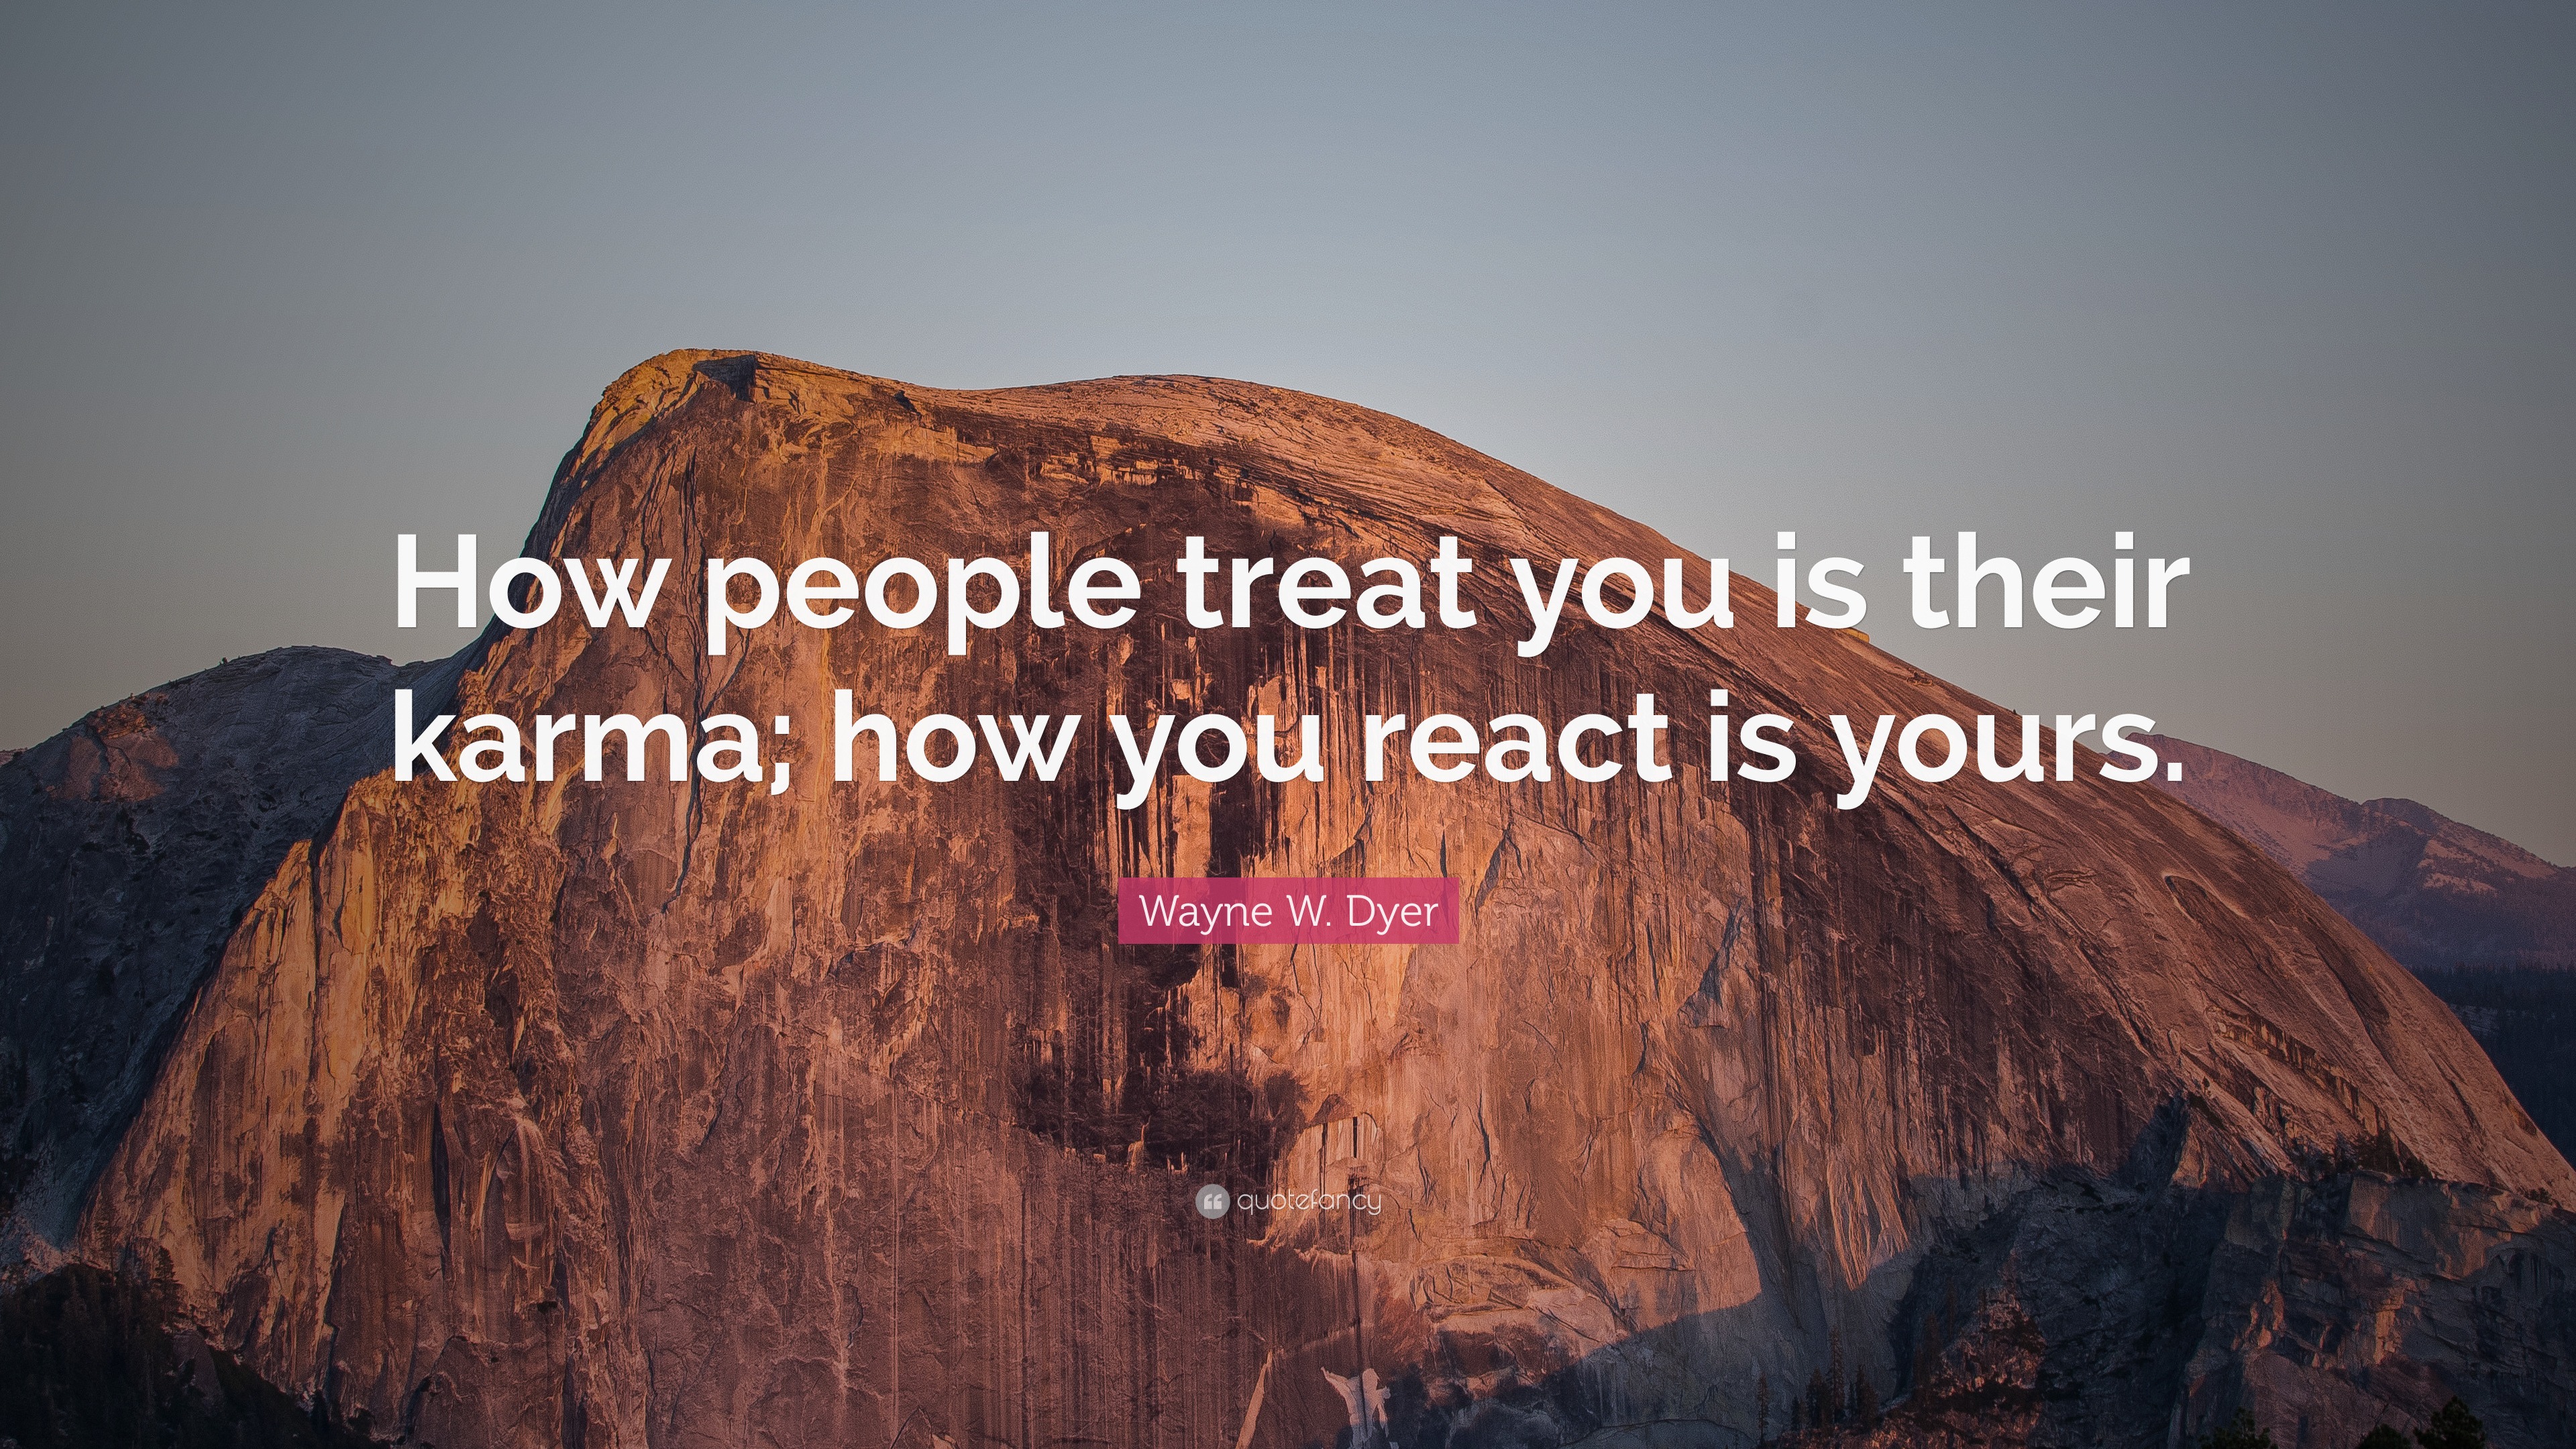 Wayne W. Dyer Quote: “How people treat you is their karma; how you